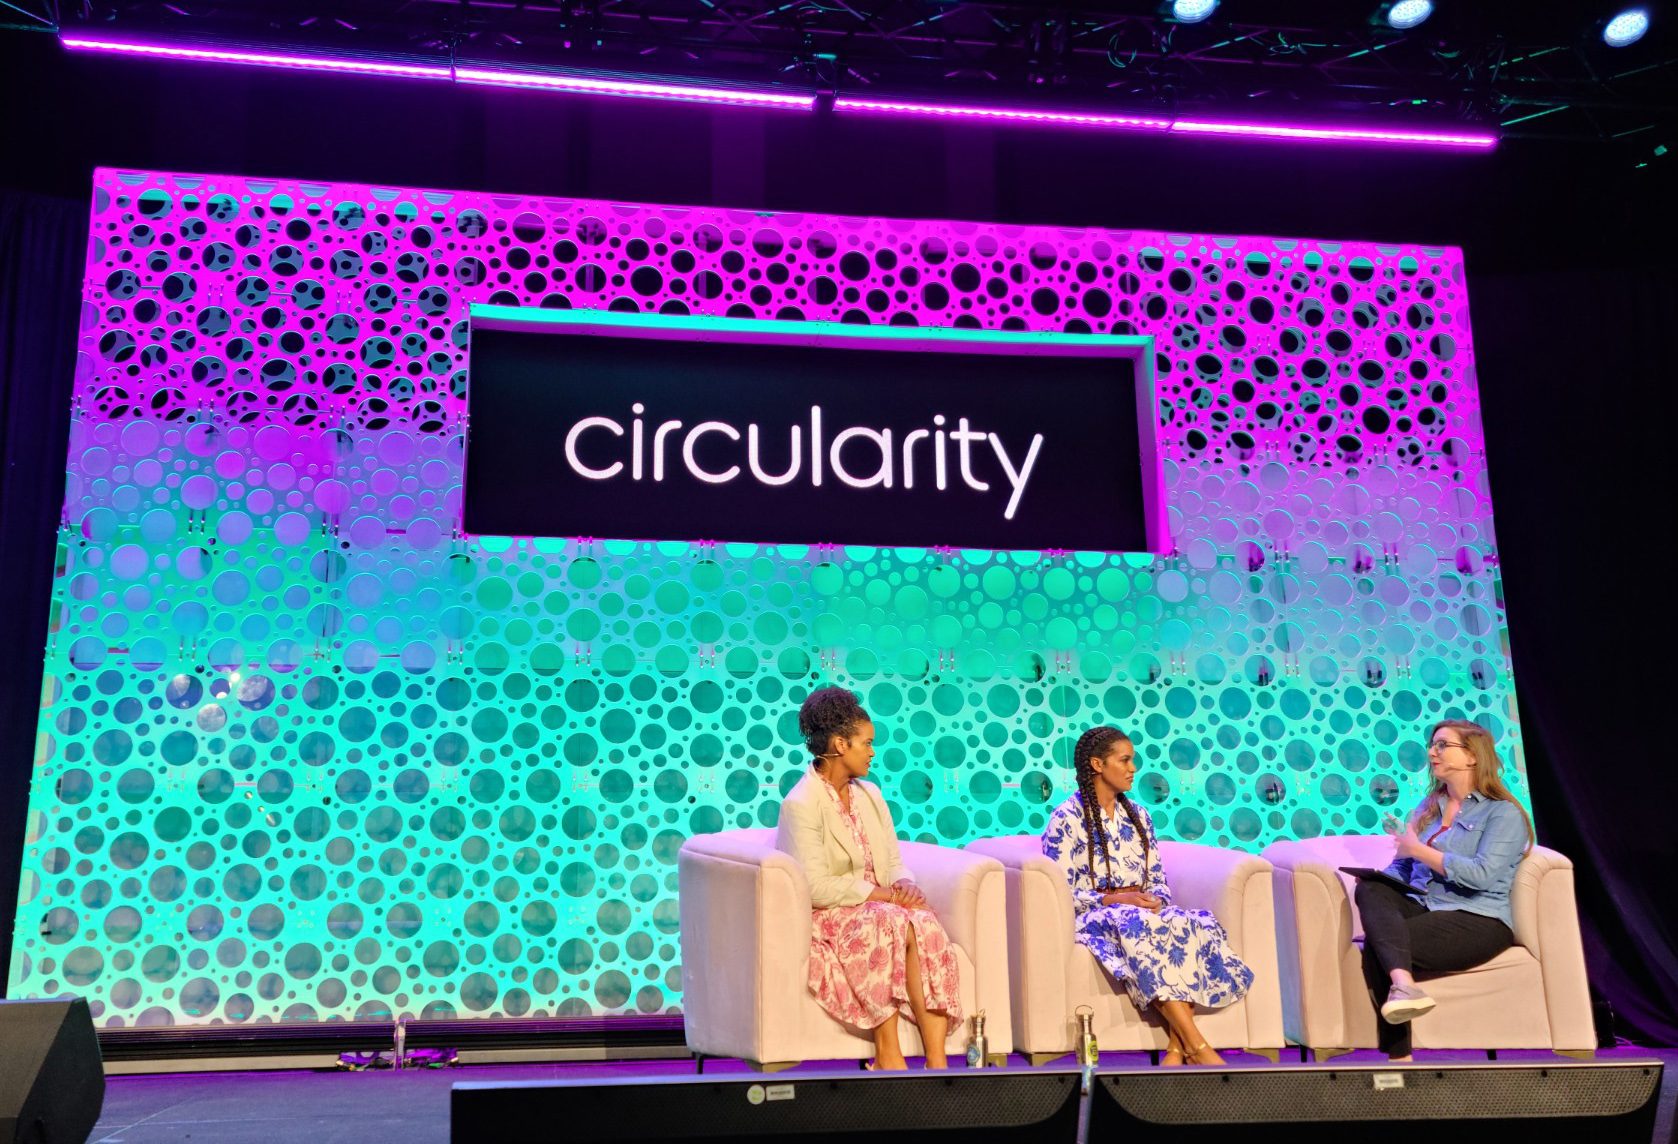 Three participants discussing issues on stage at Circularity 23, sitting on chairs in front of the brightly lit background.